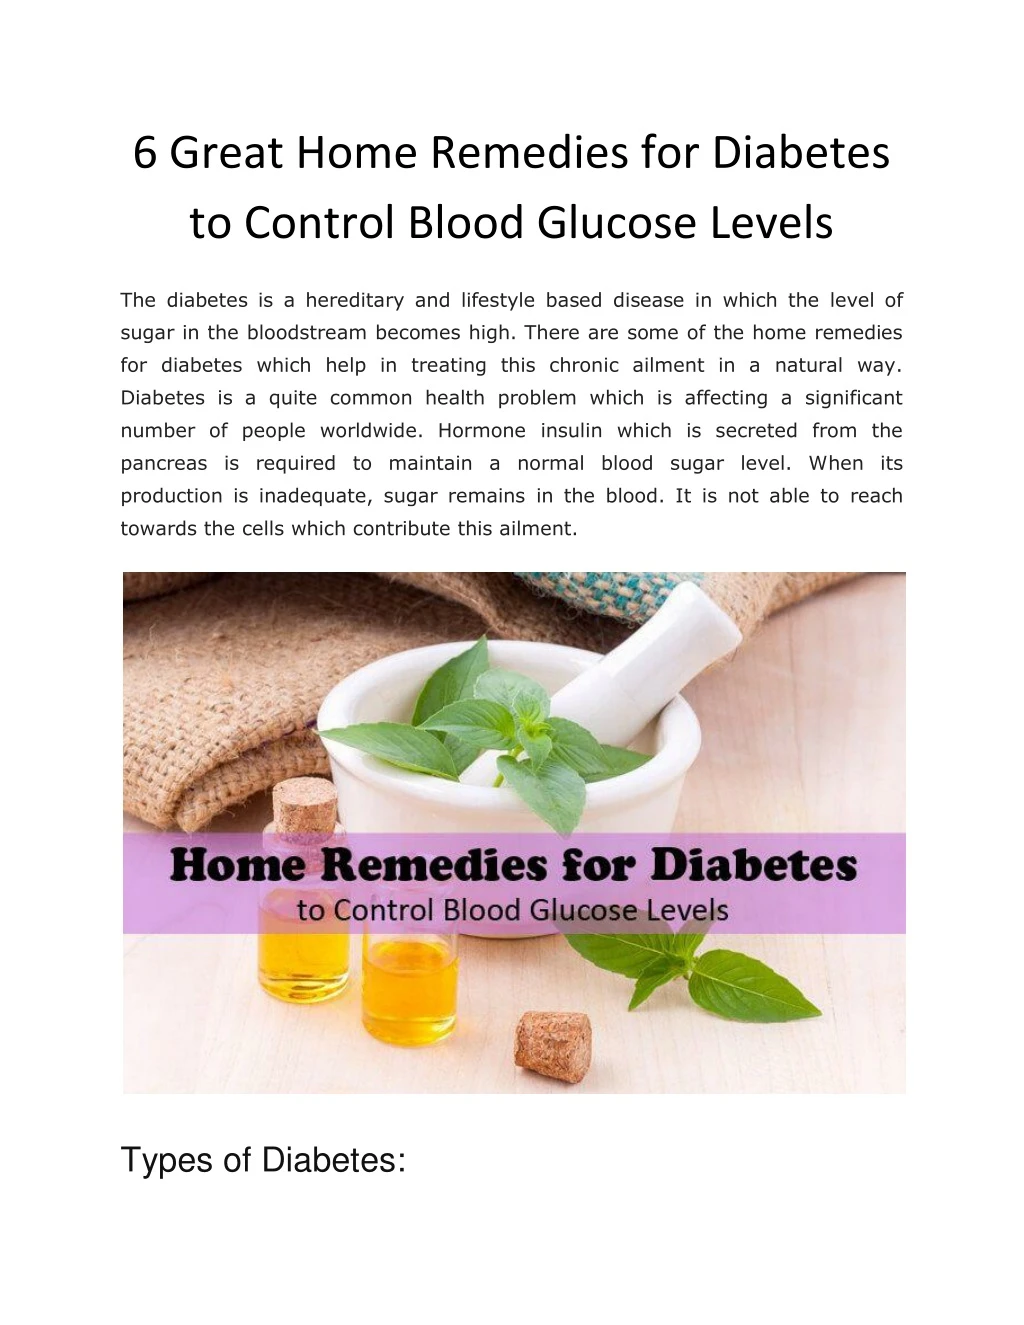 6 great home remedies for diabetes to control